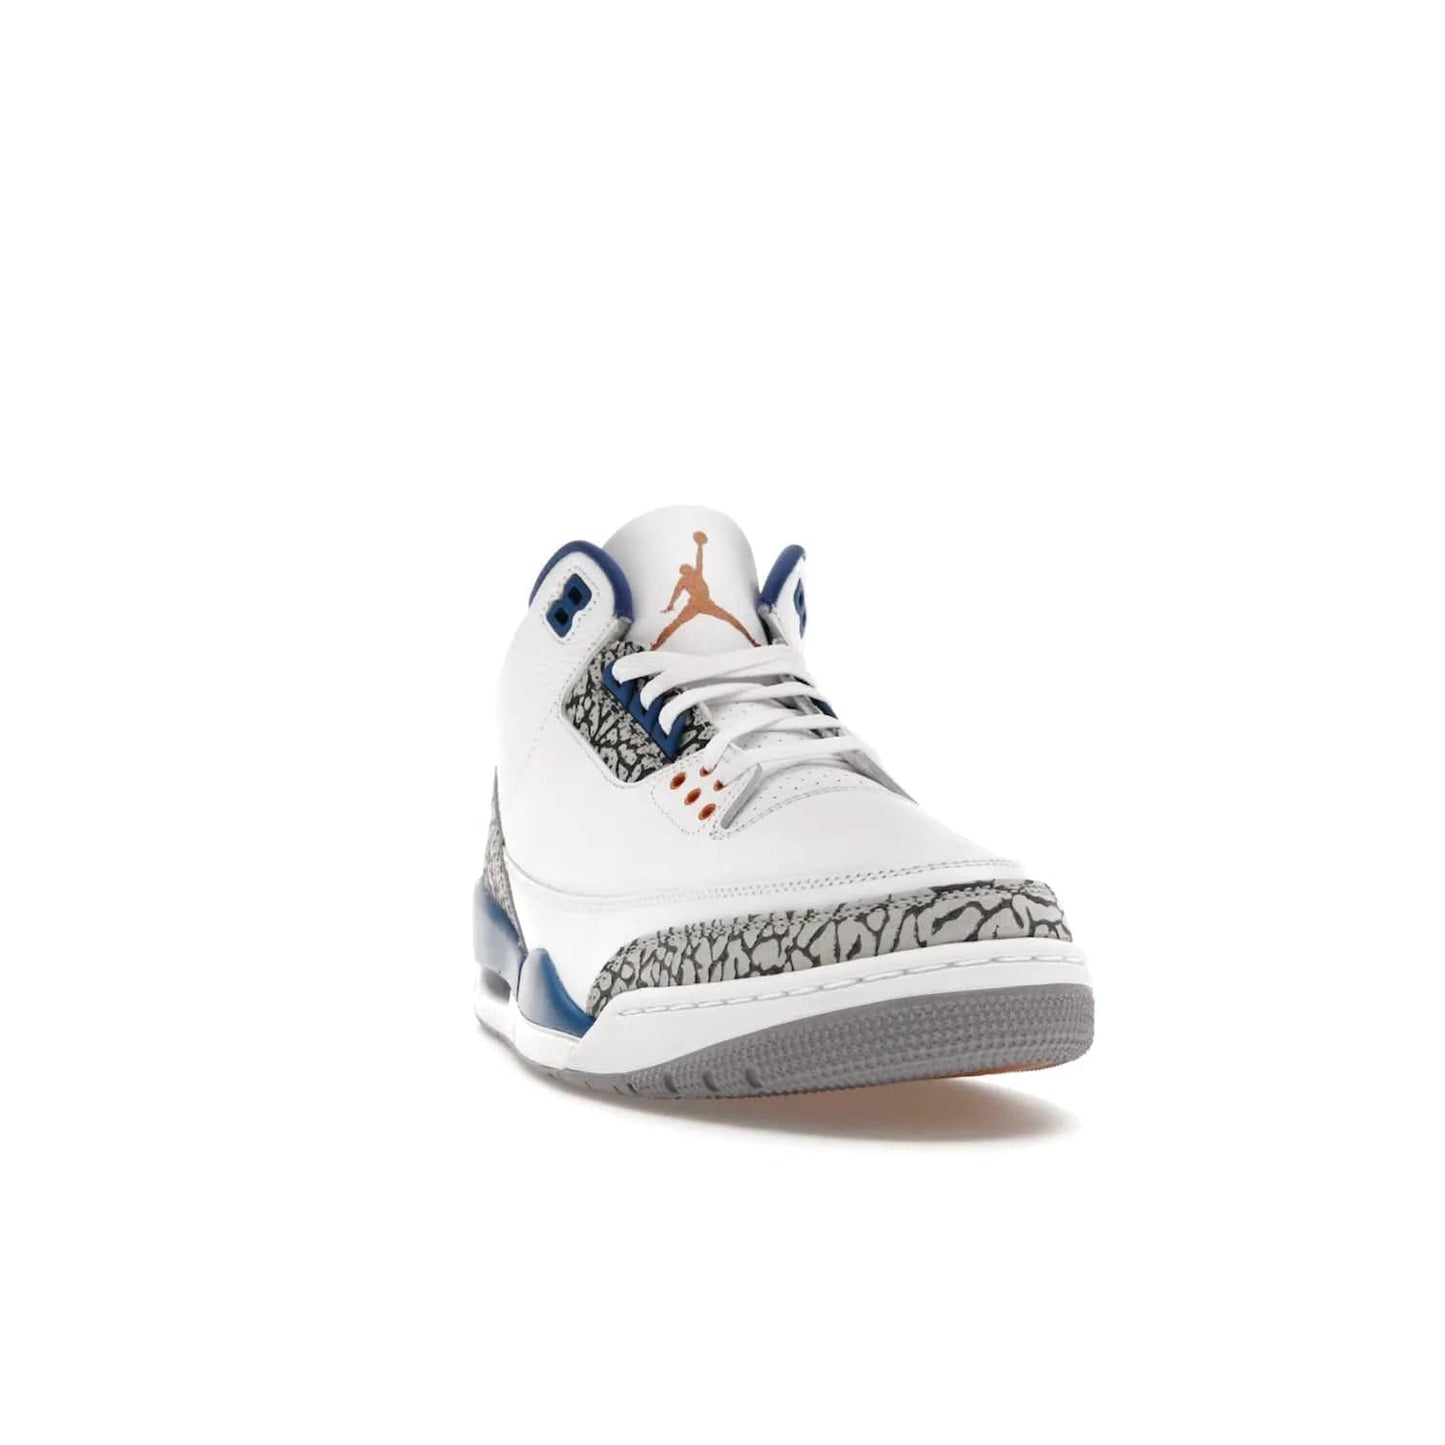 Jordan 3 Retro Wizards - Image 8 - Only at www.BallersClubKickz.com - ##
Special tribute sneaker from Jordan Brand to Michael Jordan's time with the Washington Wizards. Iconic white upper, orange Jumpman logo, blue accents, metallic copper details, and cement grey outsole. Buy the Air Jordan 3 Retro Wizards April 29, 2023.